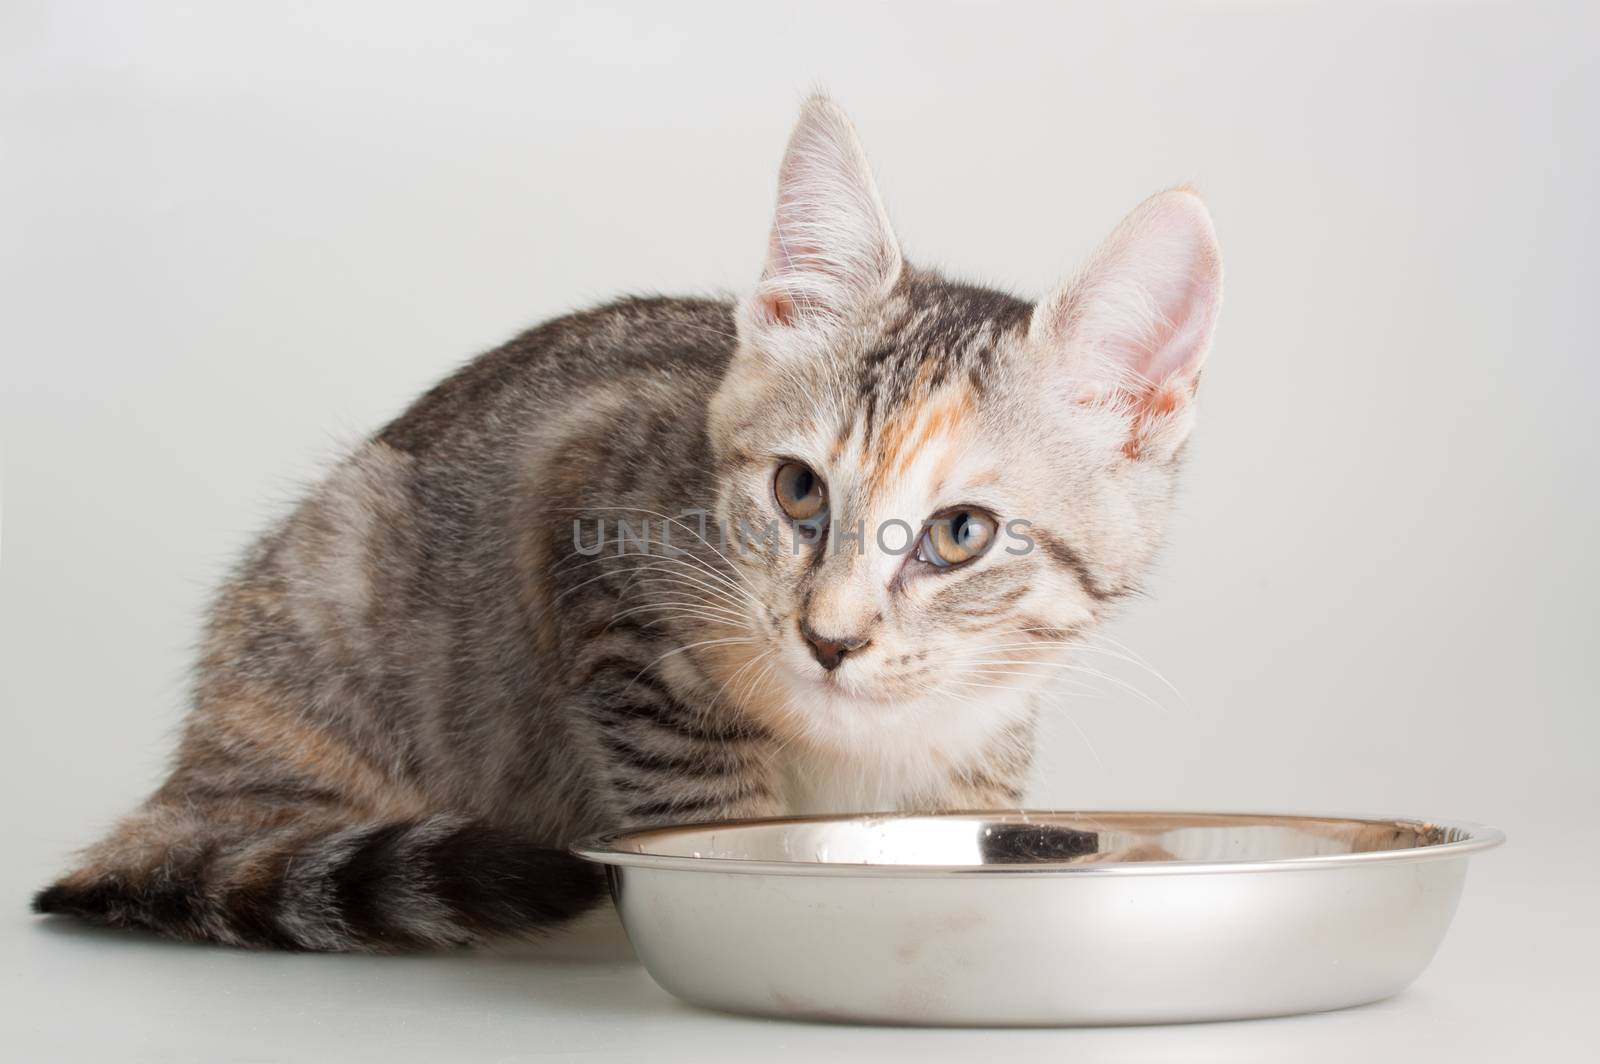 Cute kittent eating his meal in a stainless steal bowl